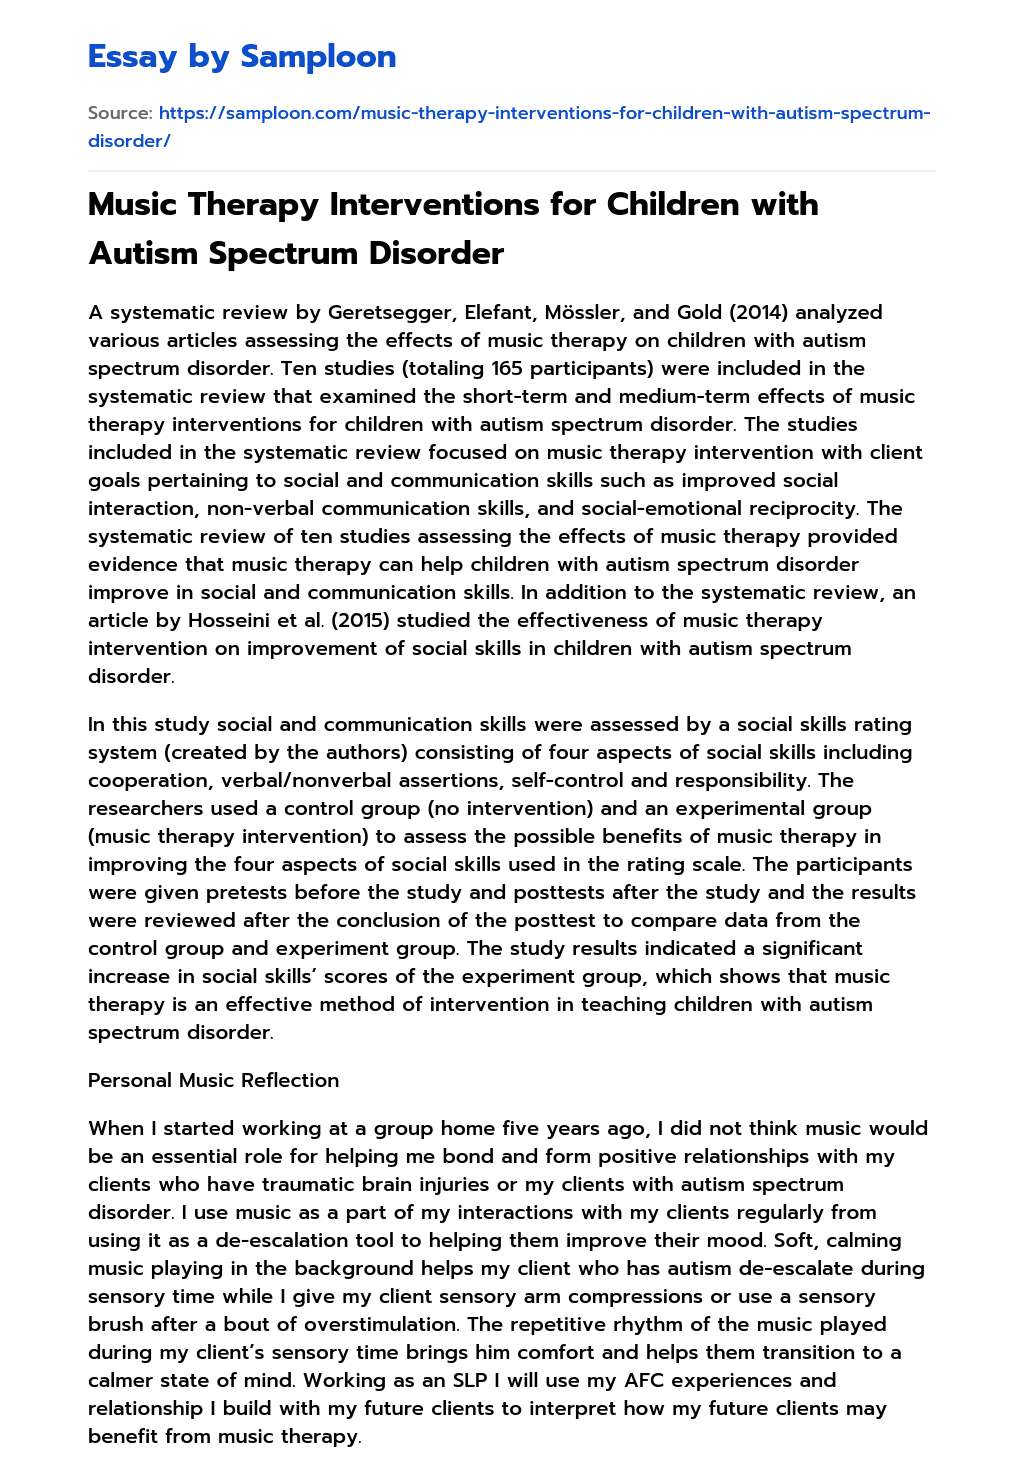 Music Therapy Interventions for Children with Autism Spectrum Disorder essay